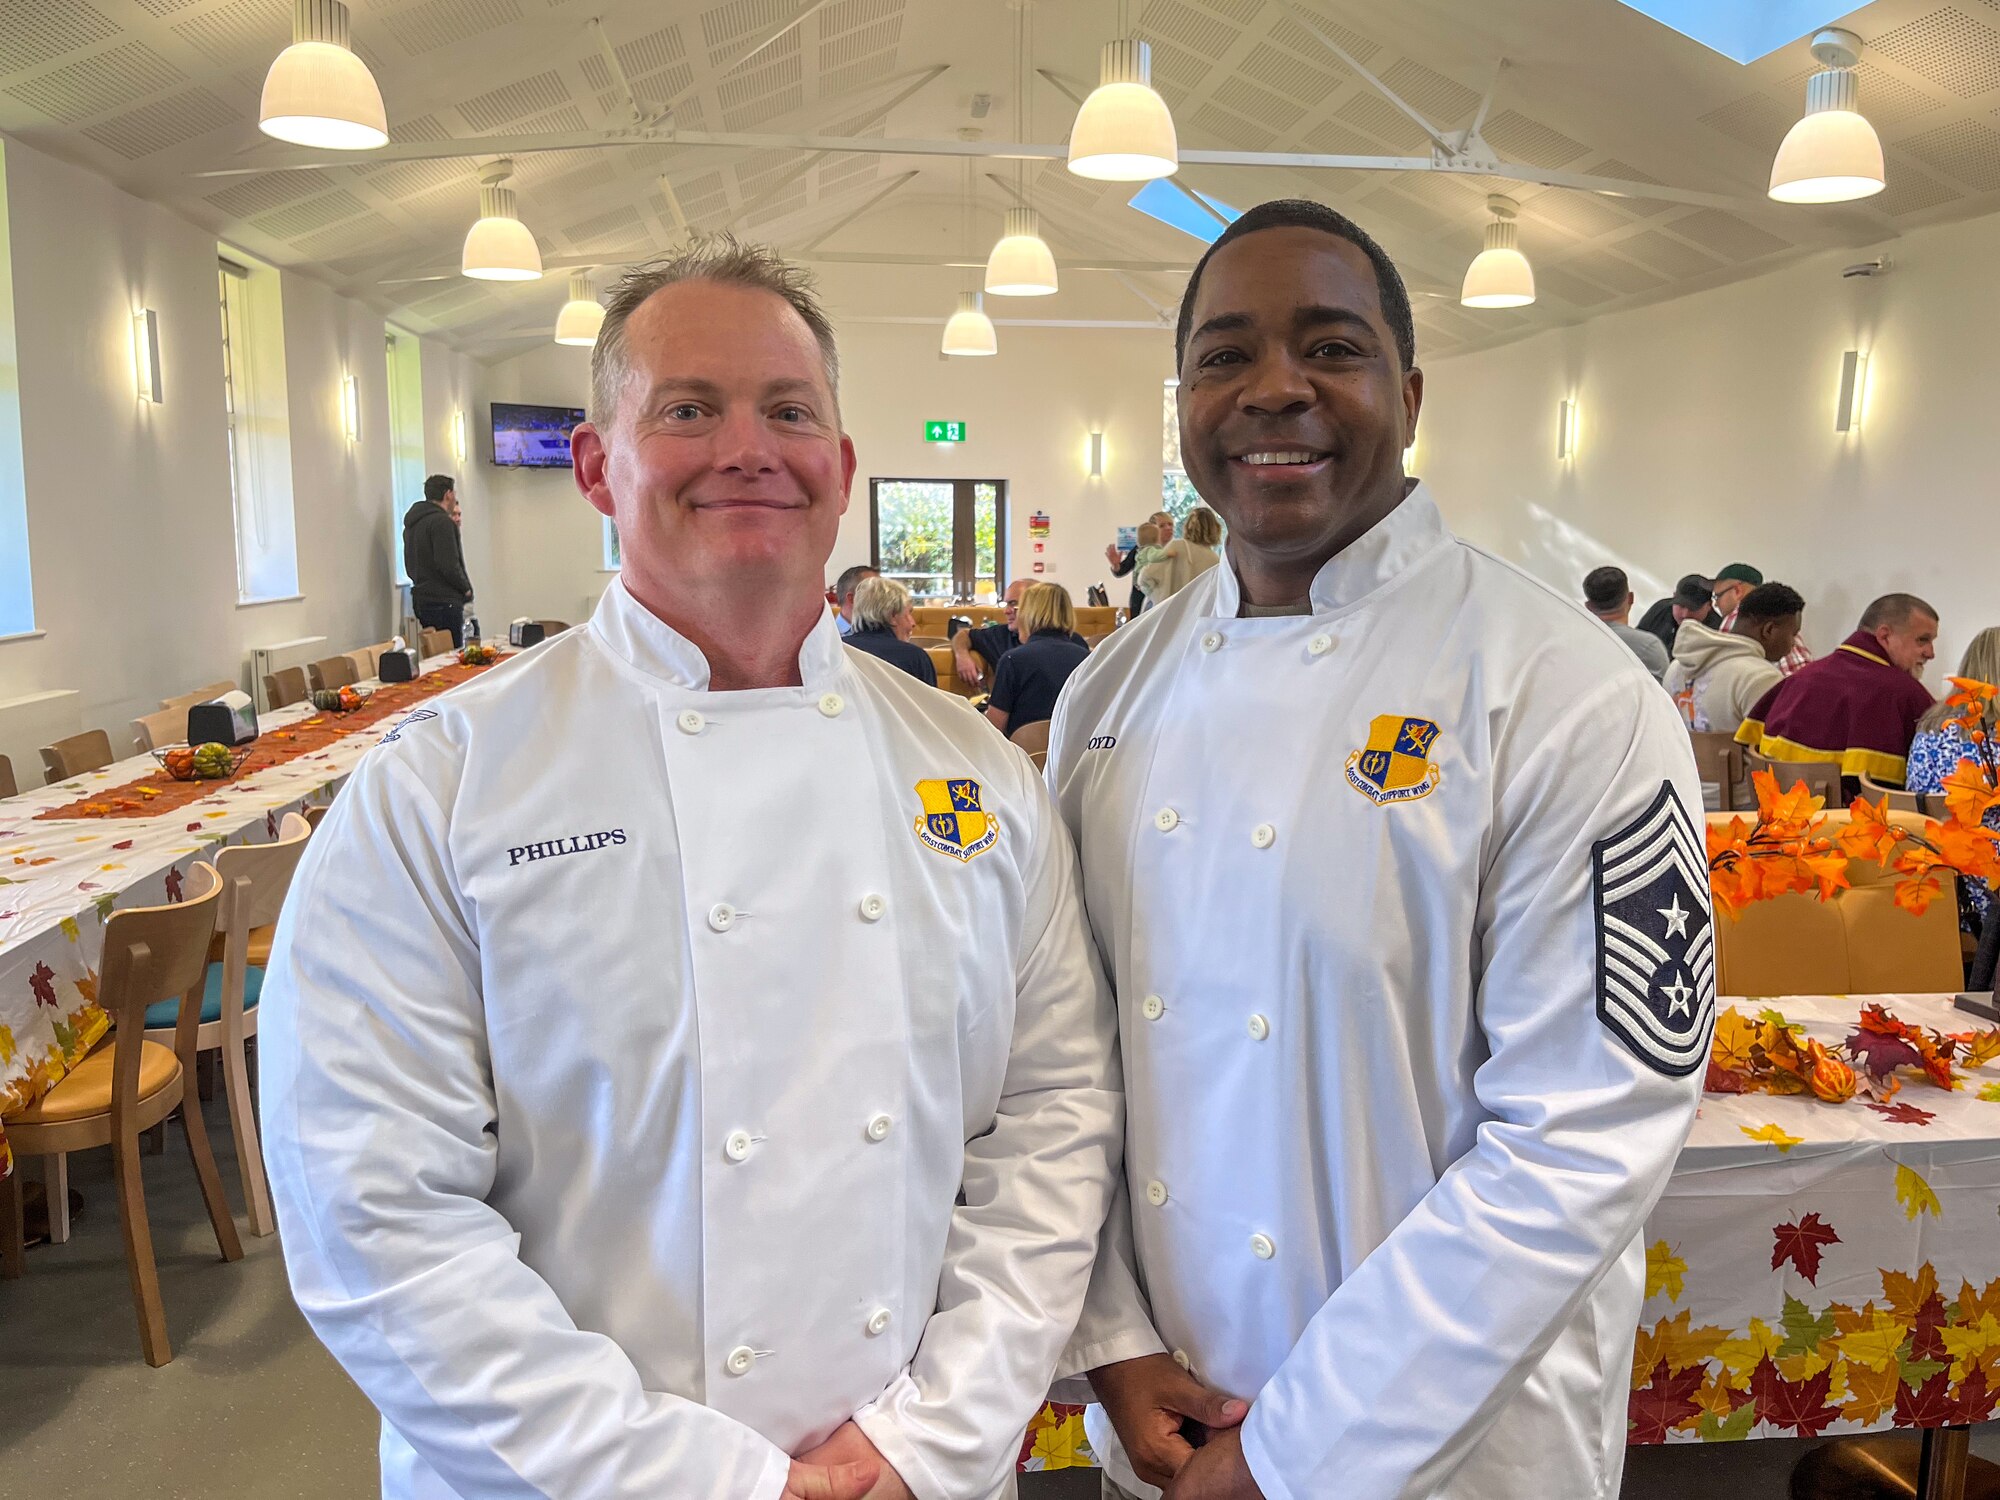 Leadership pose for a photo while wearing custom chef coats.